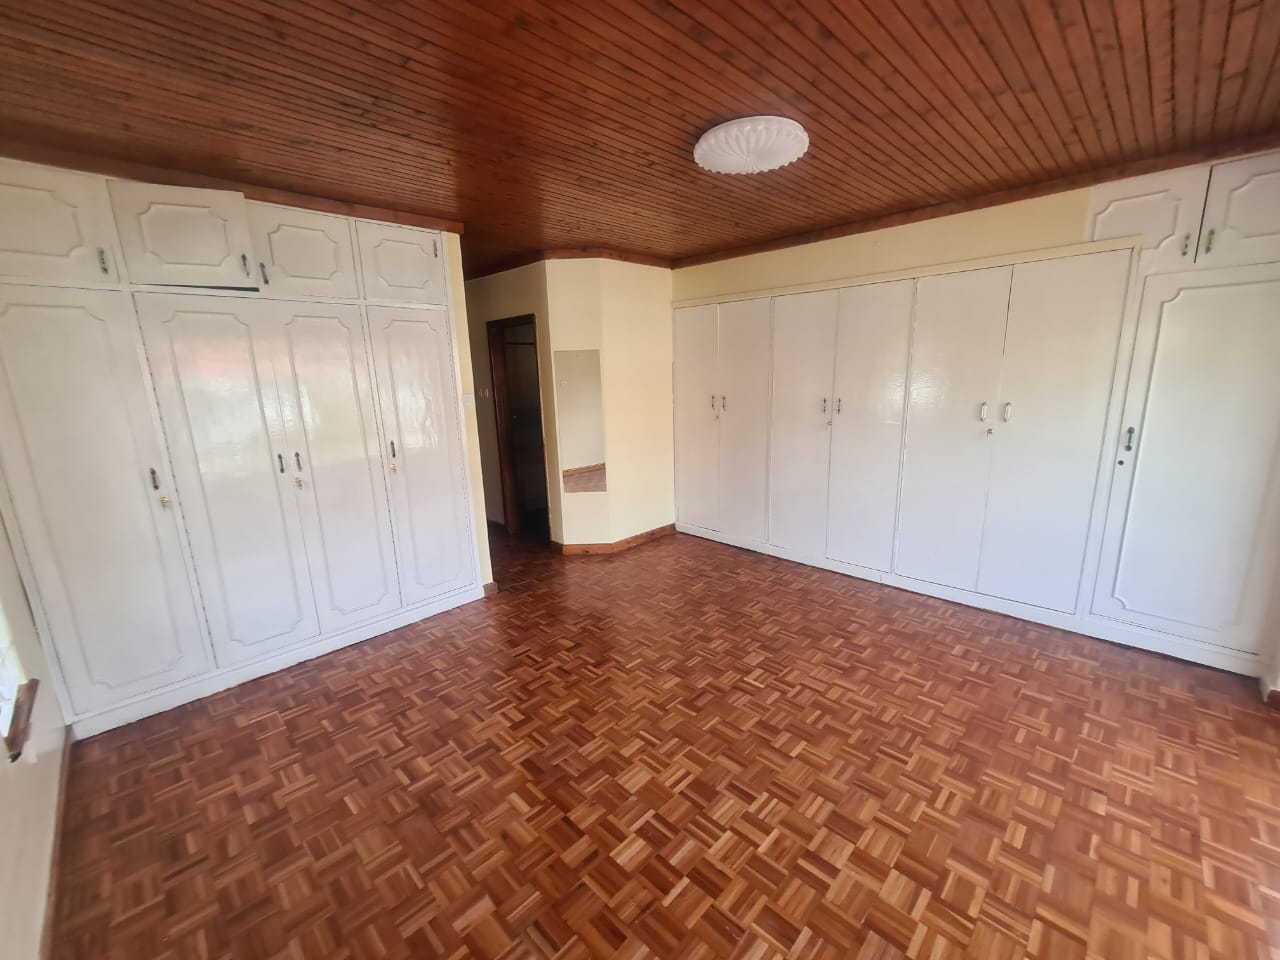 4 Bedrooms 2 Ensuite with SQ for rent at Ksh170kMonth in Kilimani (22)